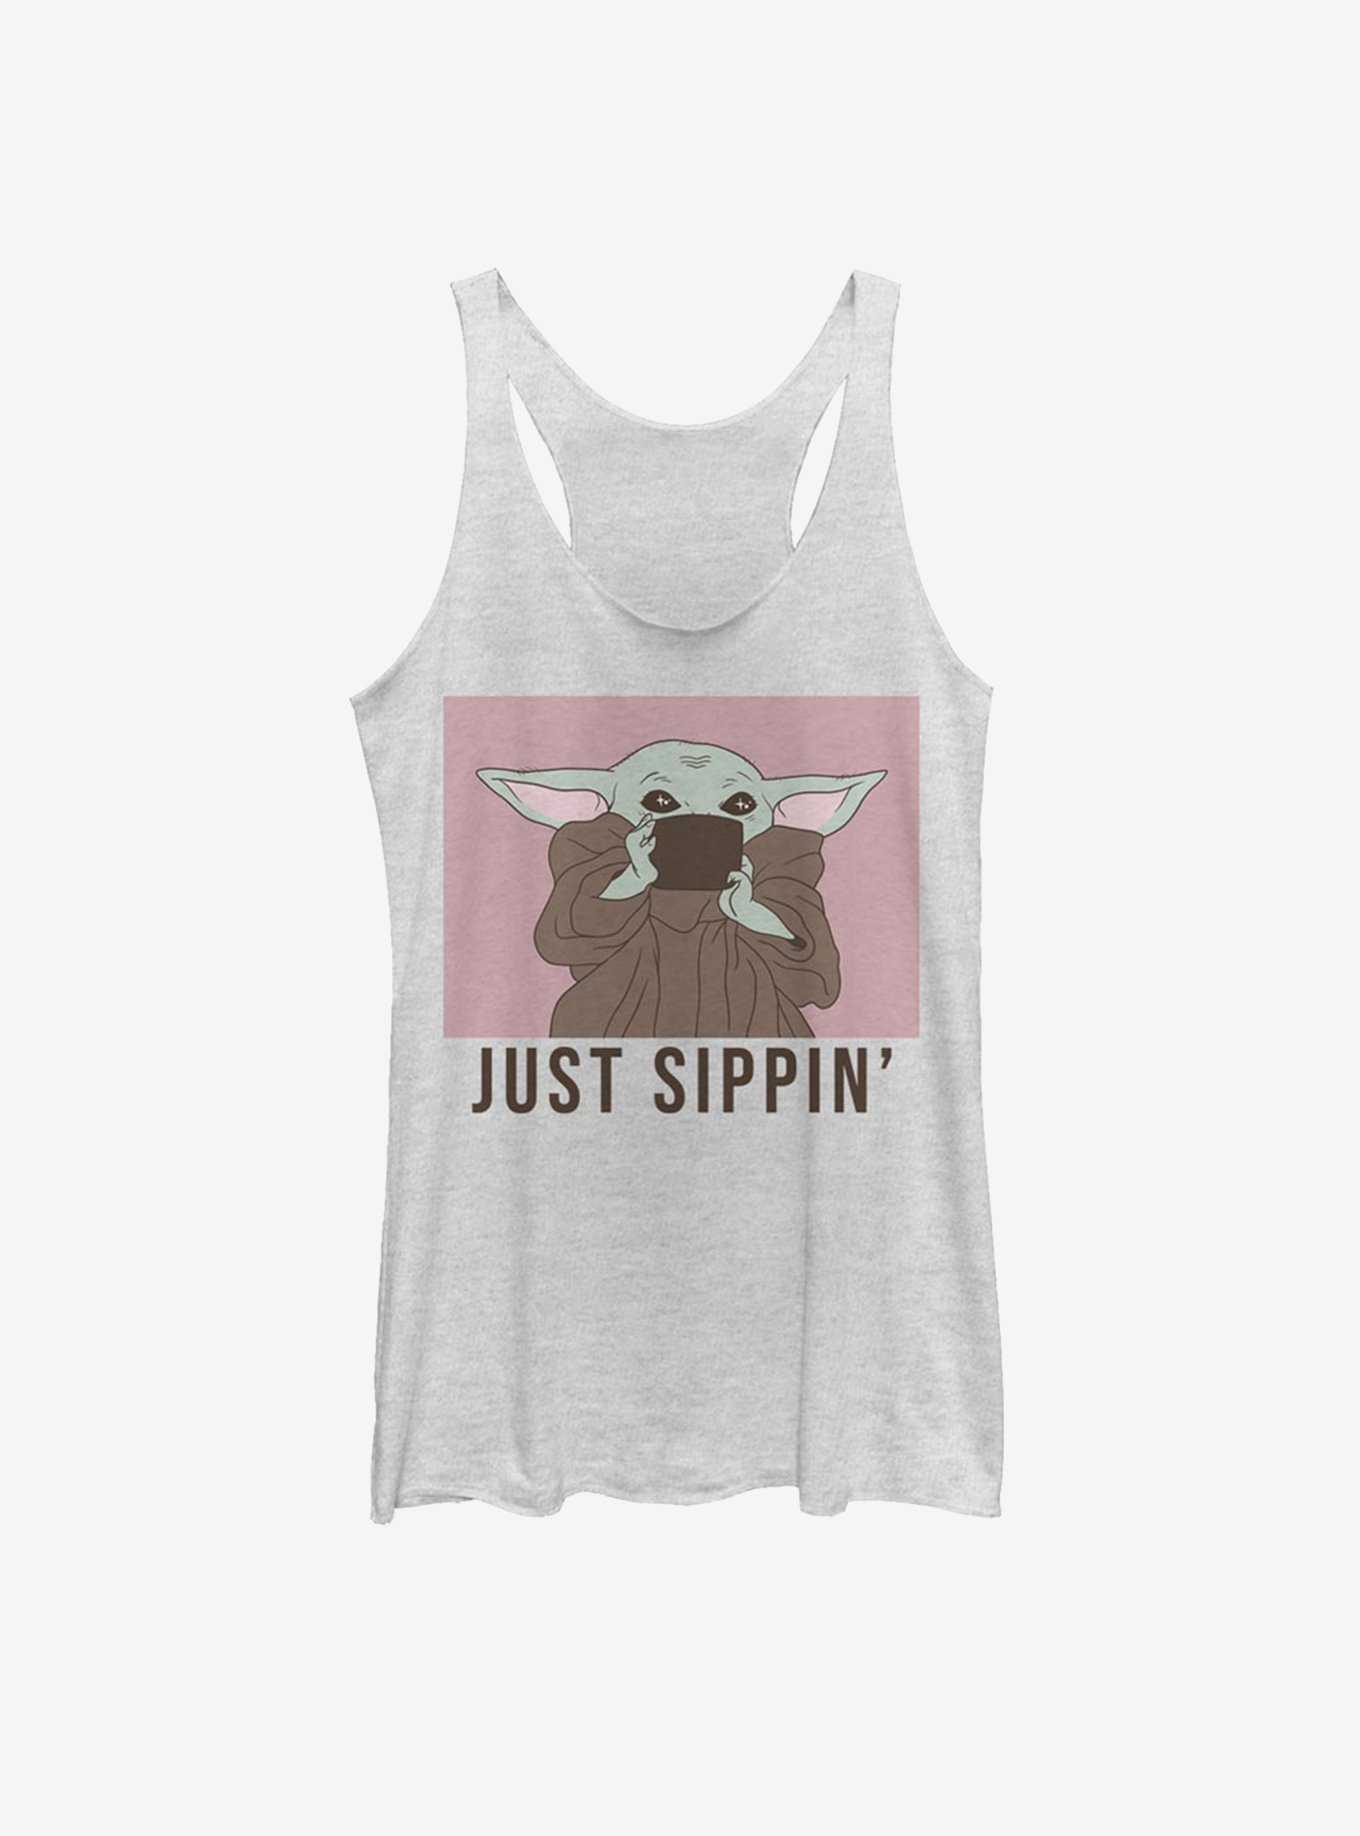 Star Wars The Mandalorian The Child Just Sippin' Womens Tank Top, , hi-res